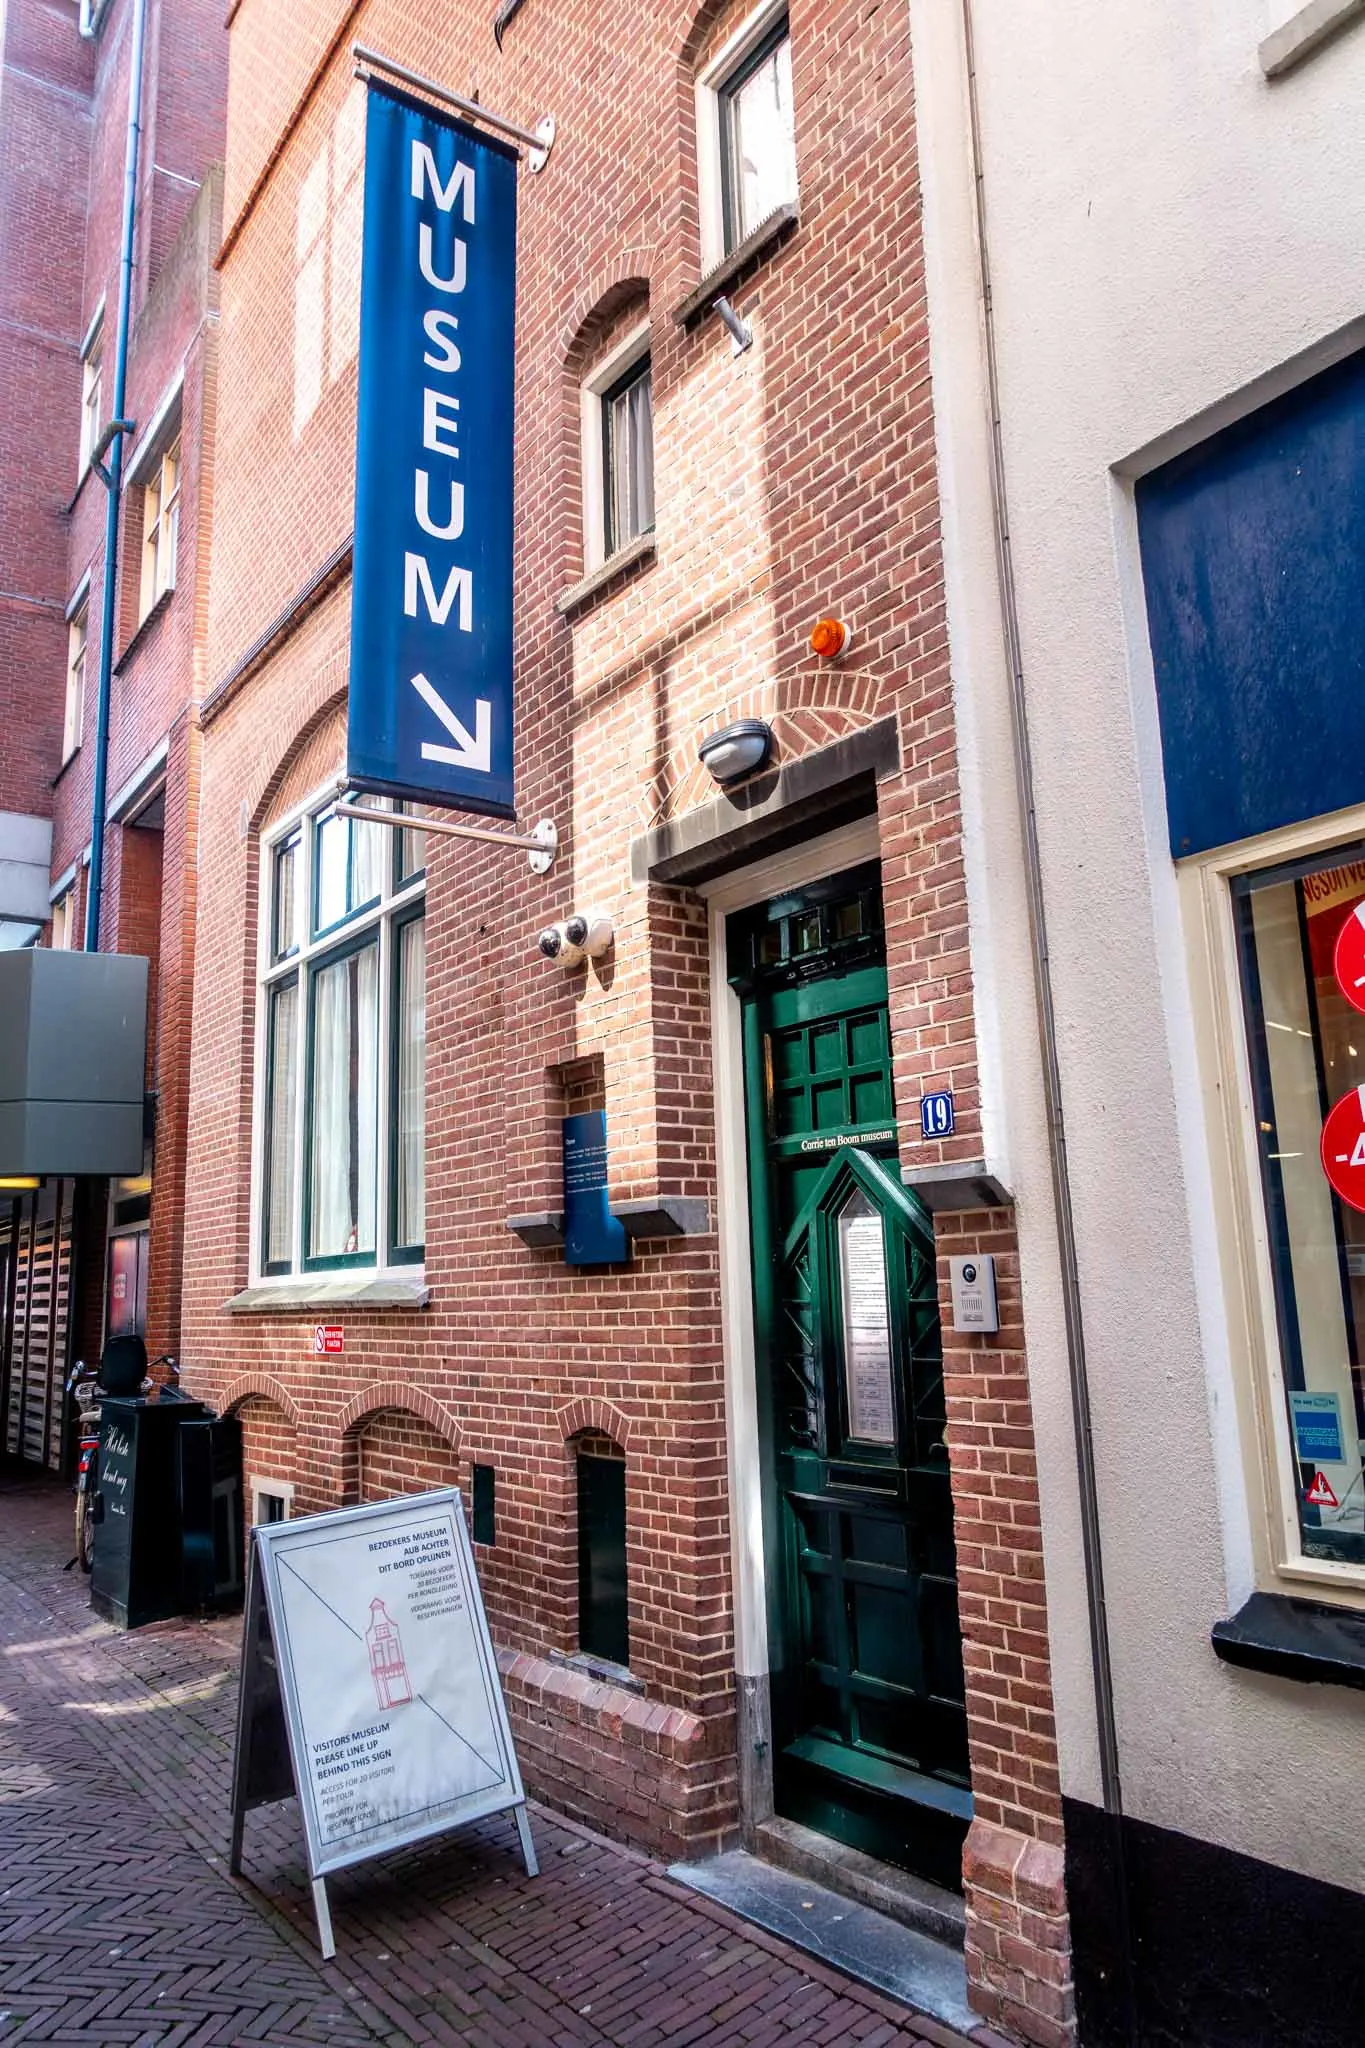 Exterior of a building with a sign that says "Museum" 